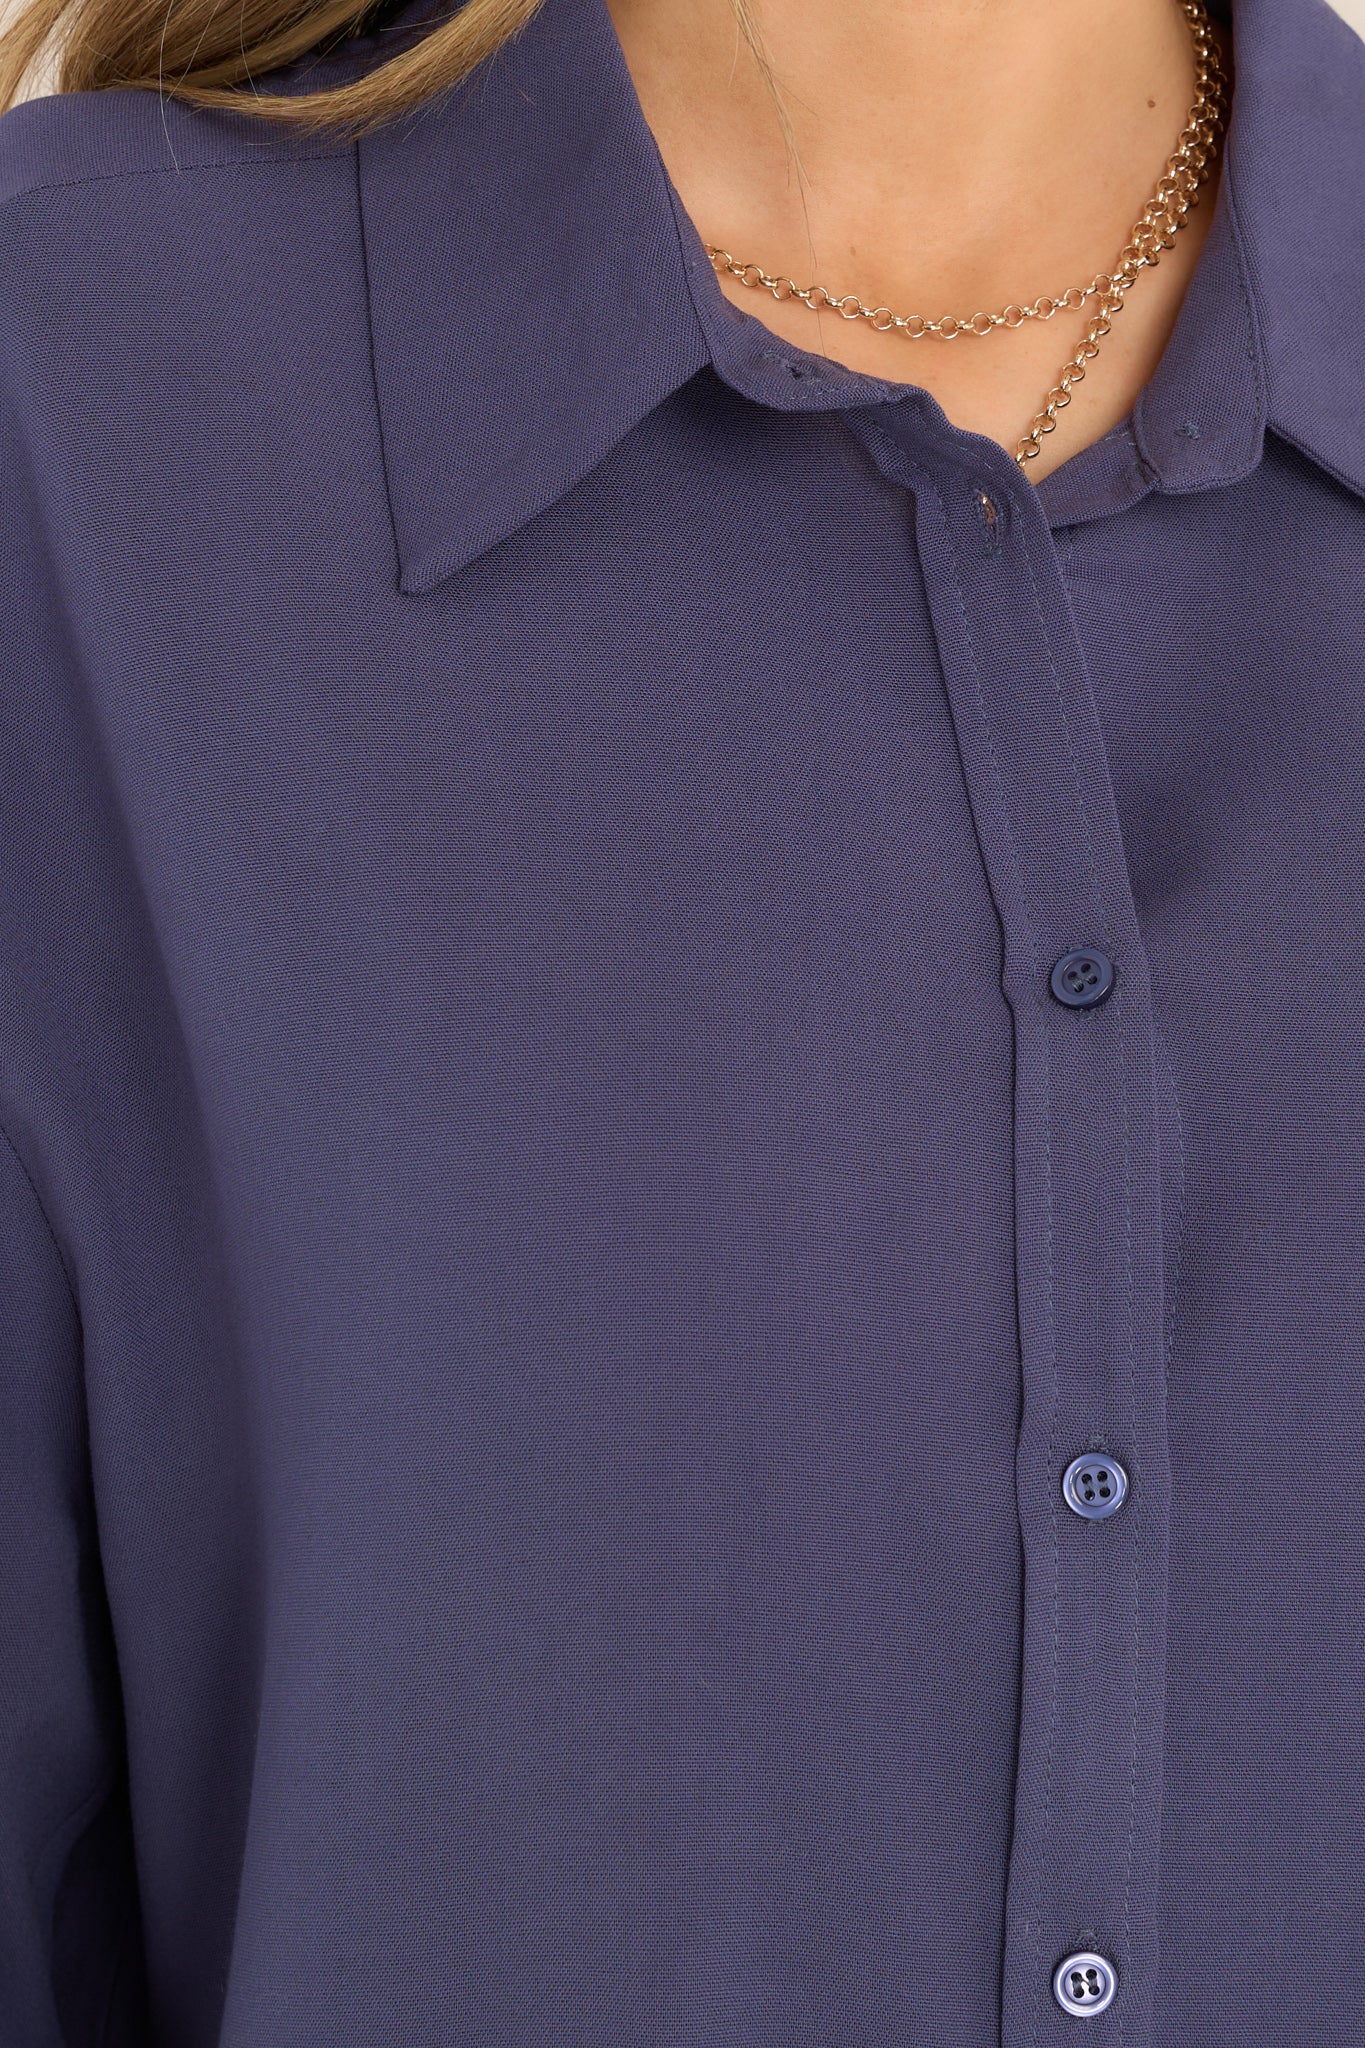 Close up view of this tunic that featuring a collared neckline, functional buttons down the front, long sleeves with buttoned cuffs, and a scoop bottom hem.